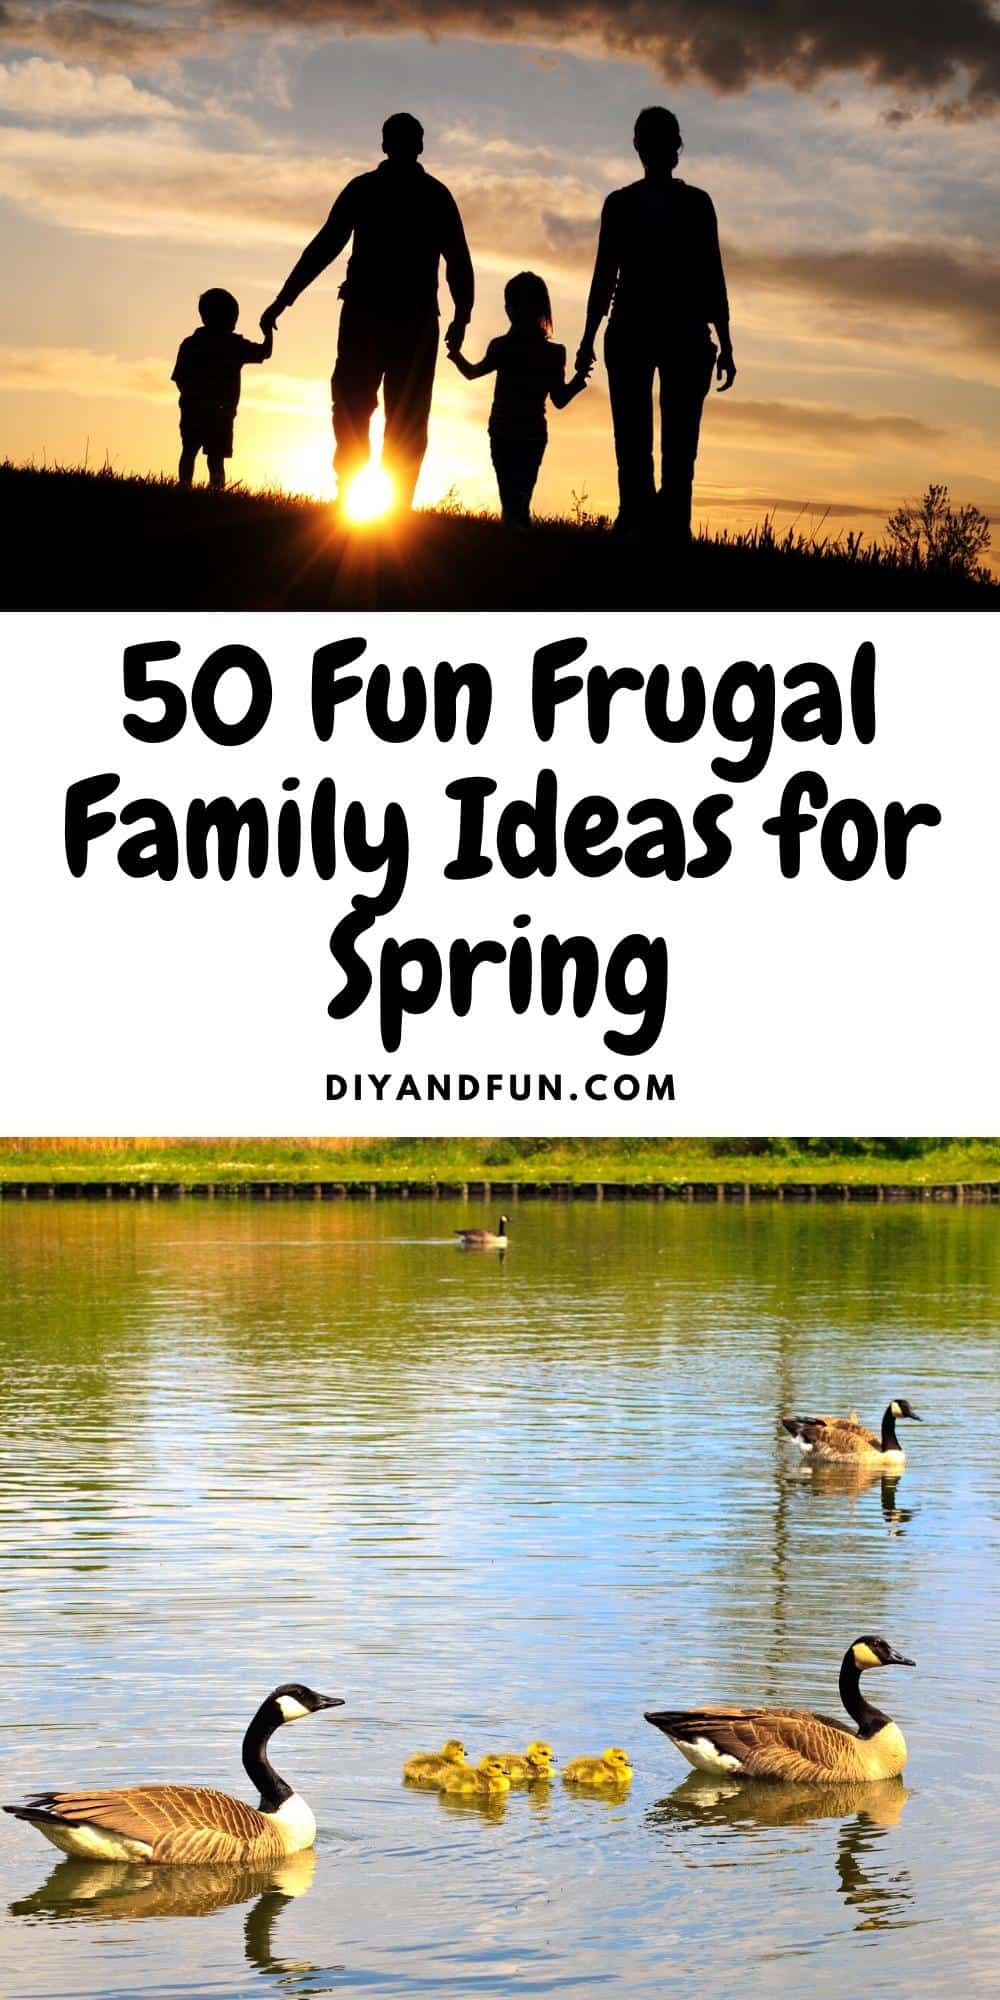 50 Fun Frugal Family Ideas for Spring, easy and frugal listing of fun ideas for most ages. Includes indoor and outdoors. Printable.